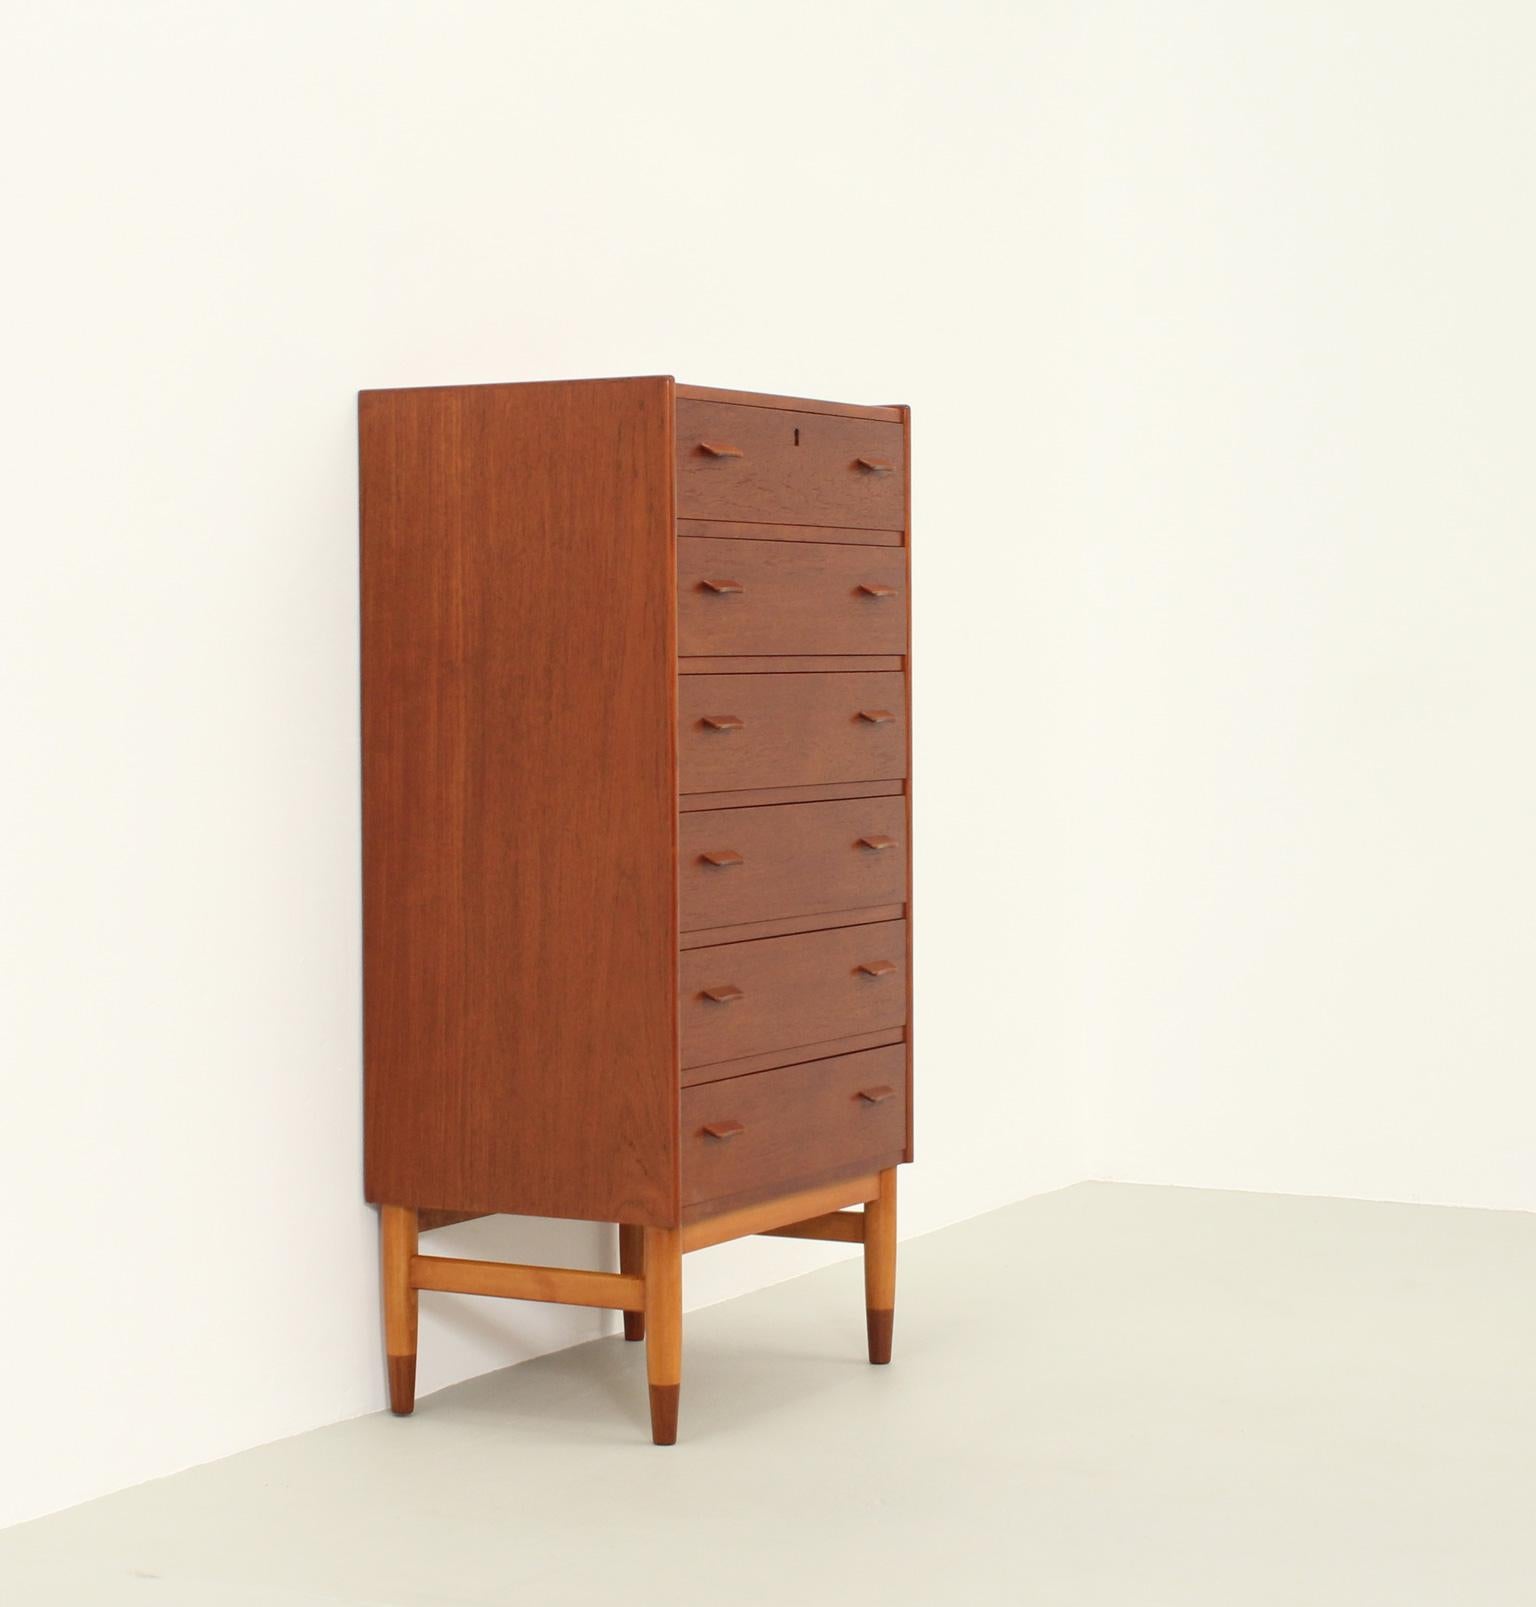 Danish Chest of Drawers by Carl Aage Skov for Munch Møbler, 1957 For Sale